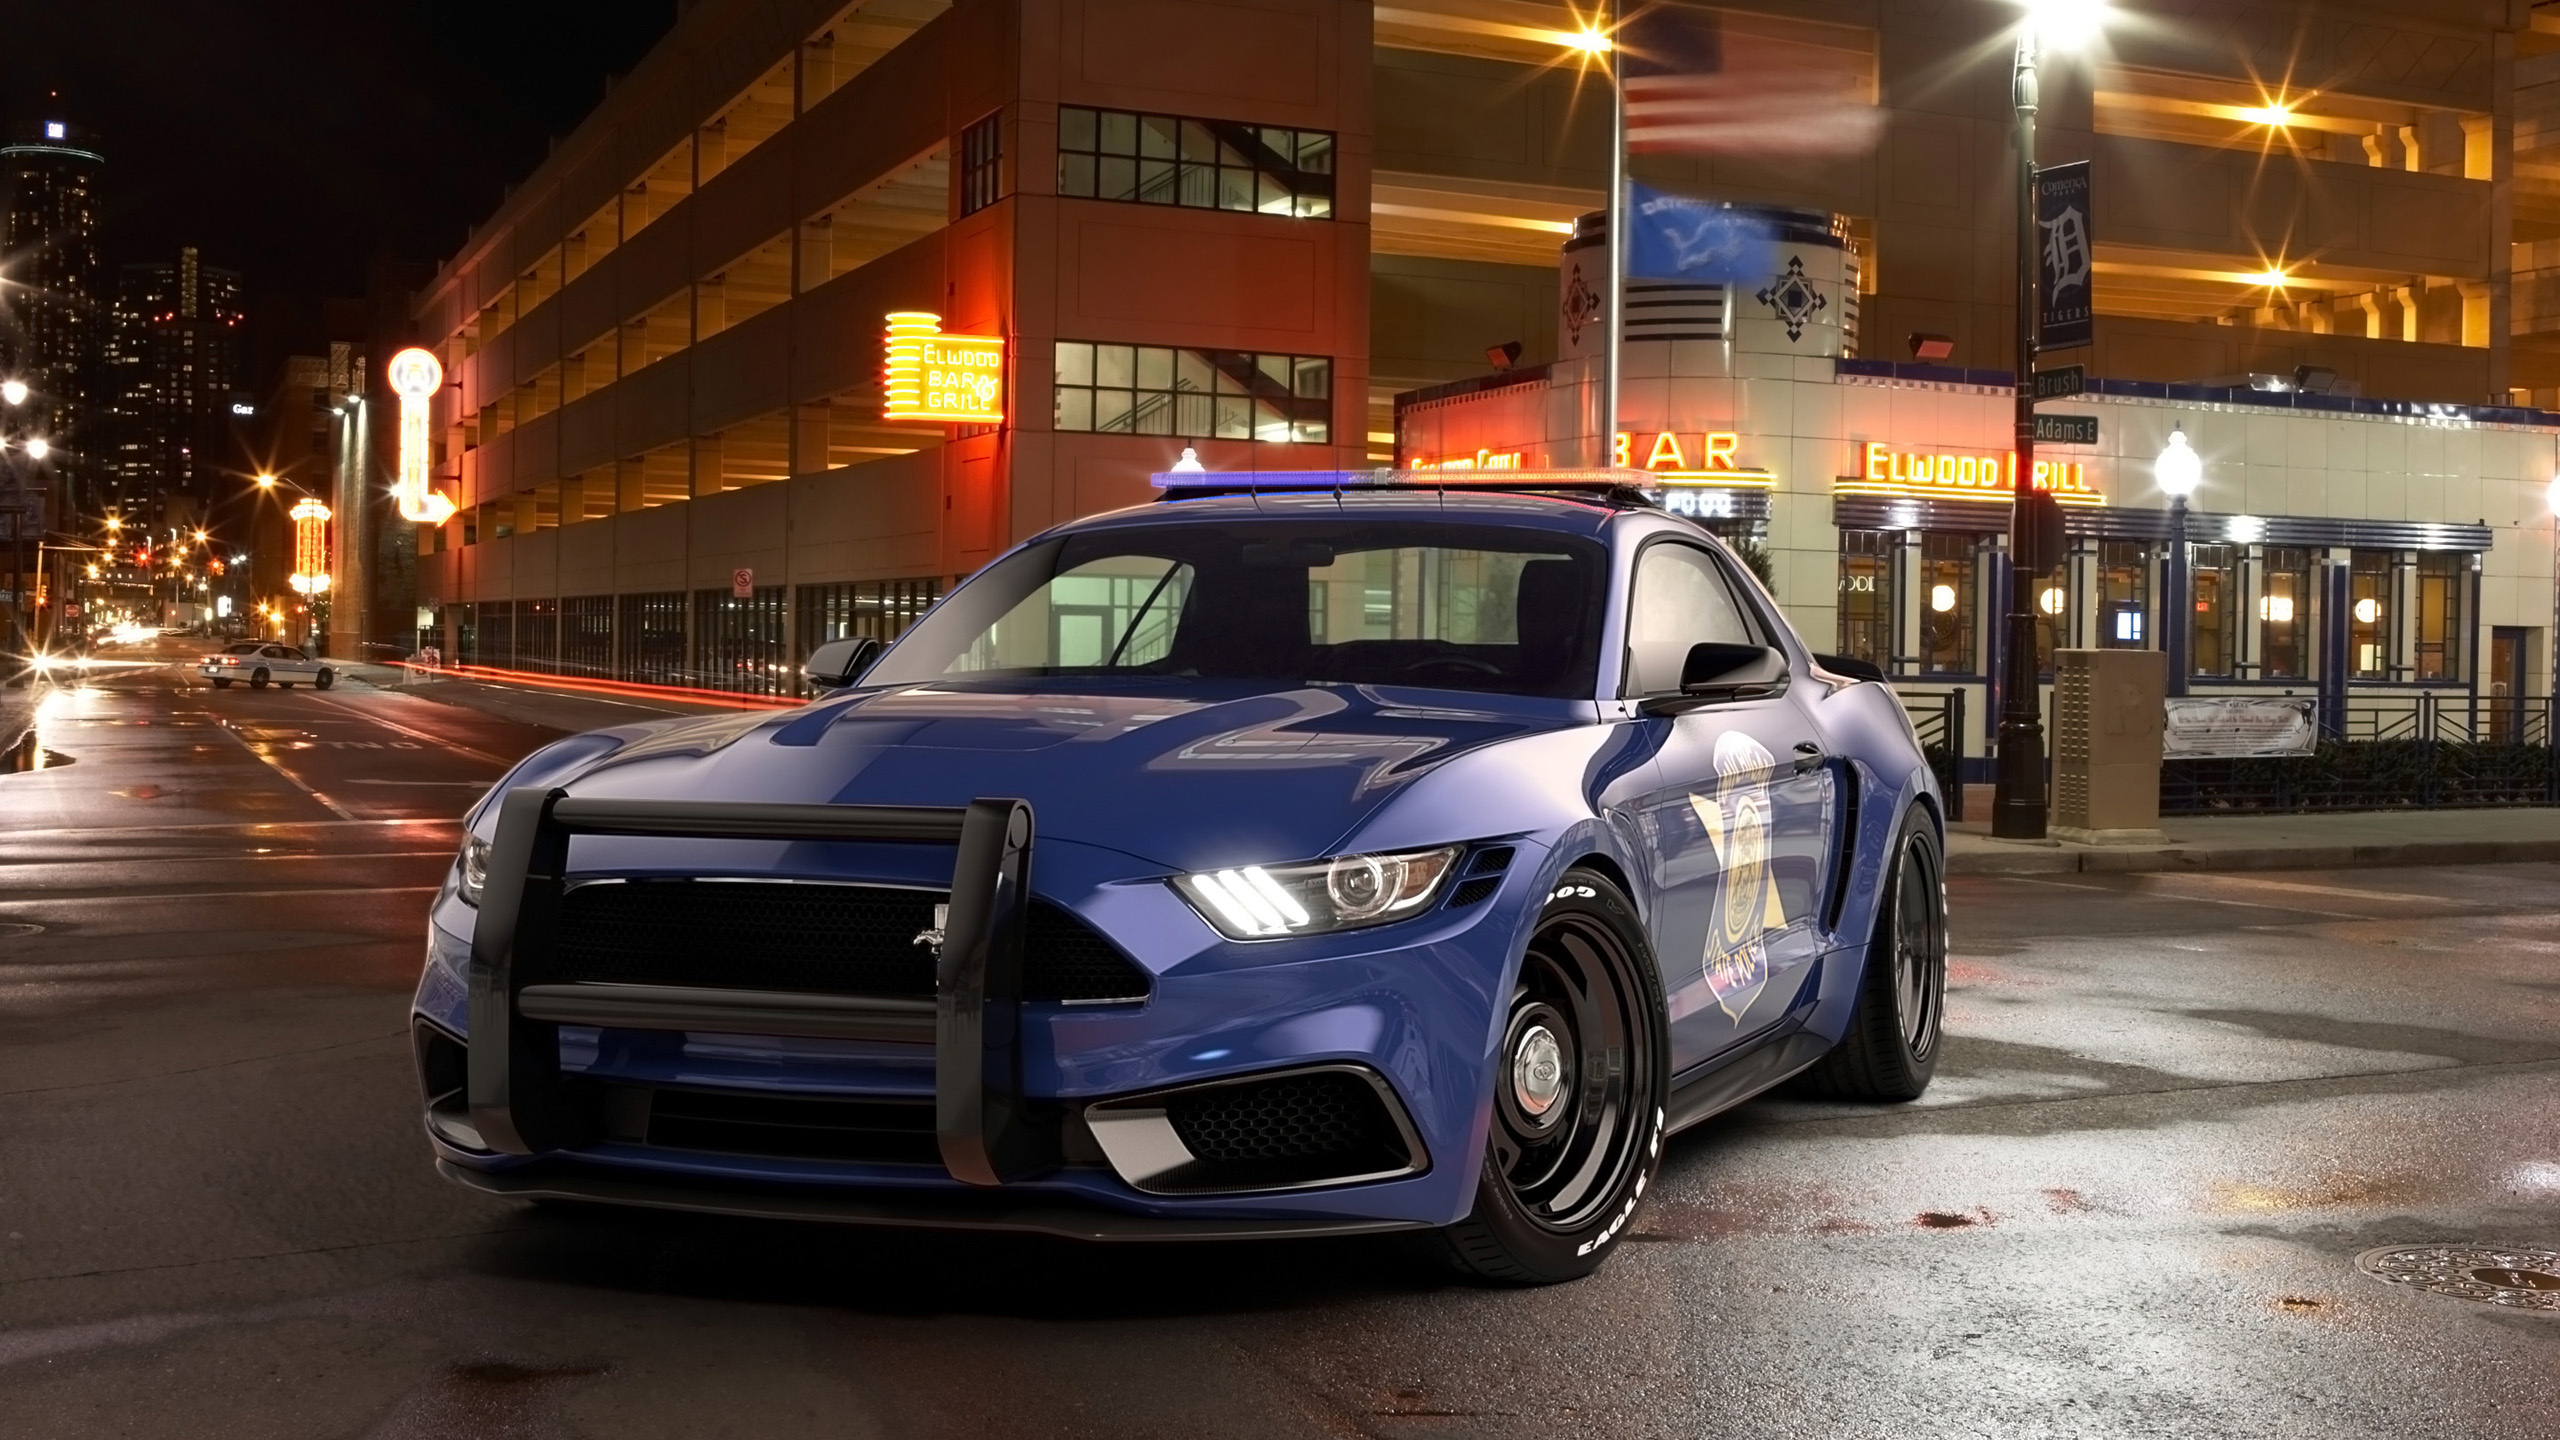 2017 Ford Mustang NotchBack Design Police Wallpaper | HD Car Wallpapers